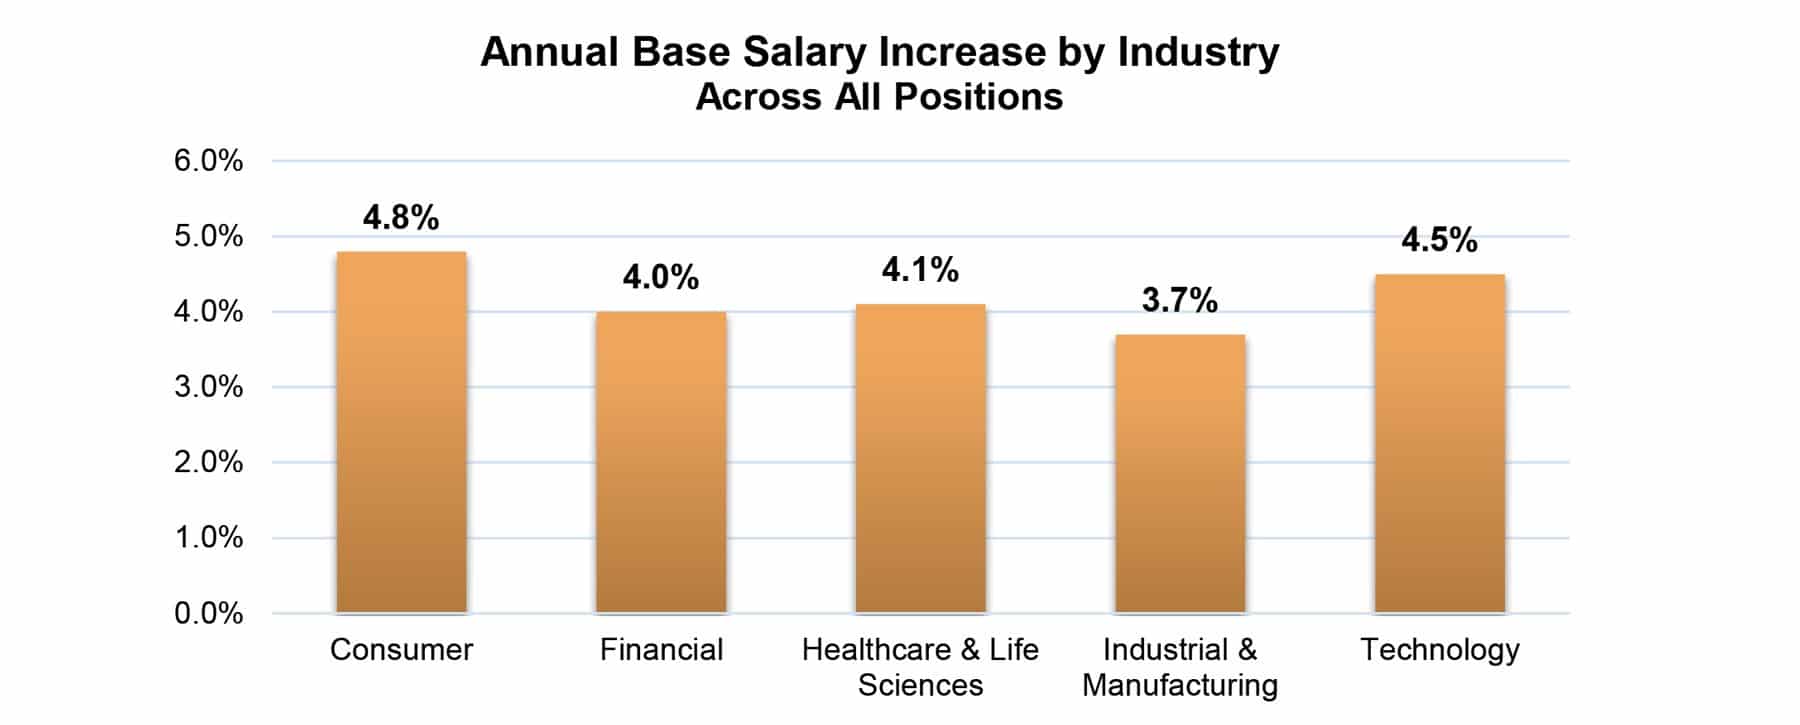 Annual Base Salary Increase by Industry Across All Positions